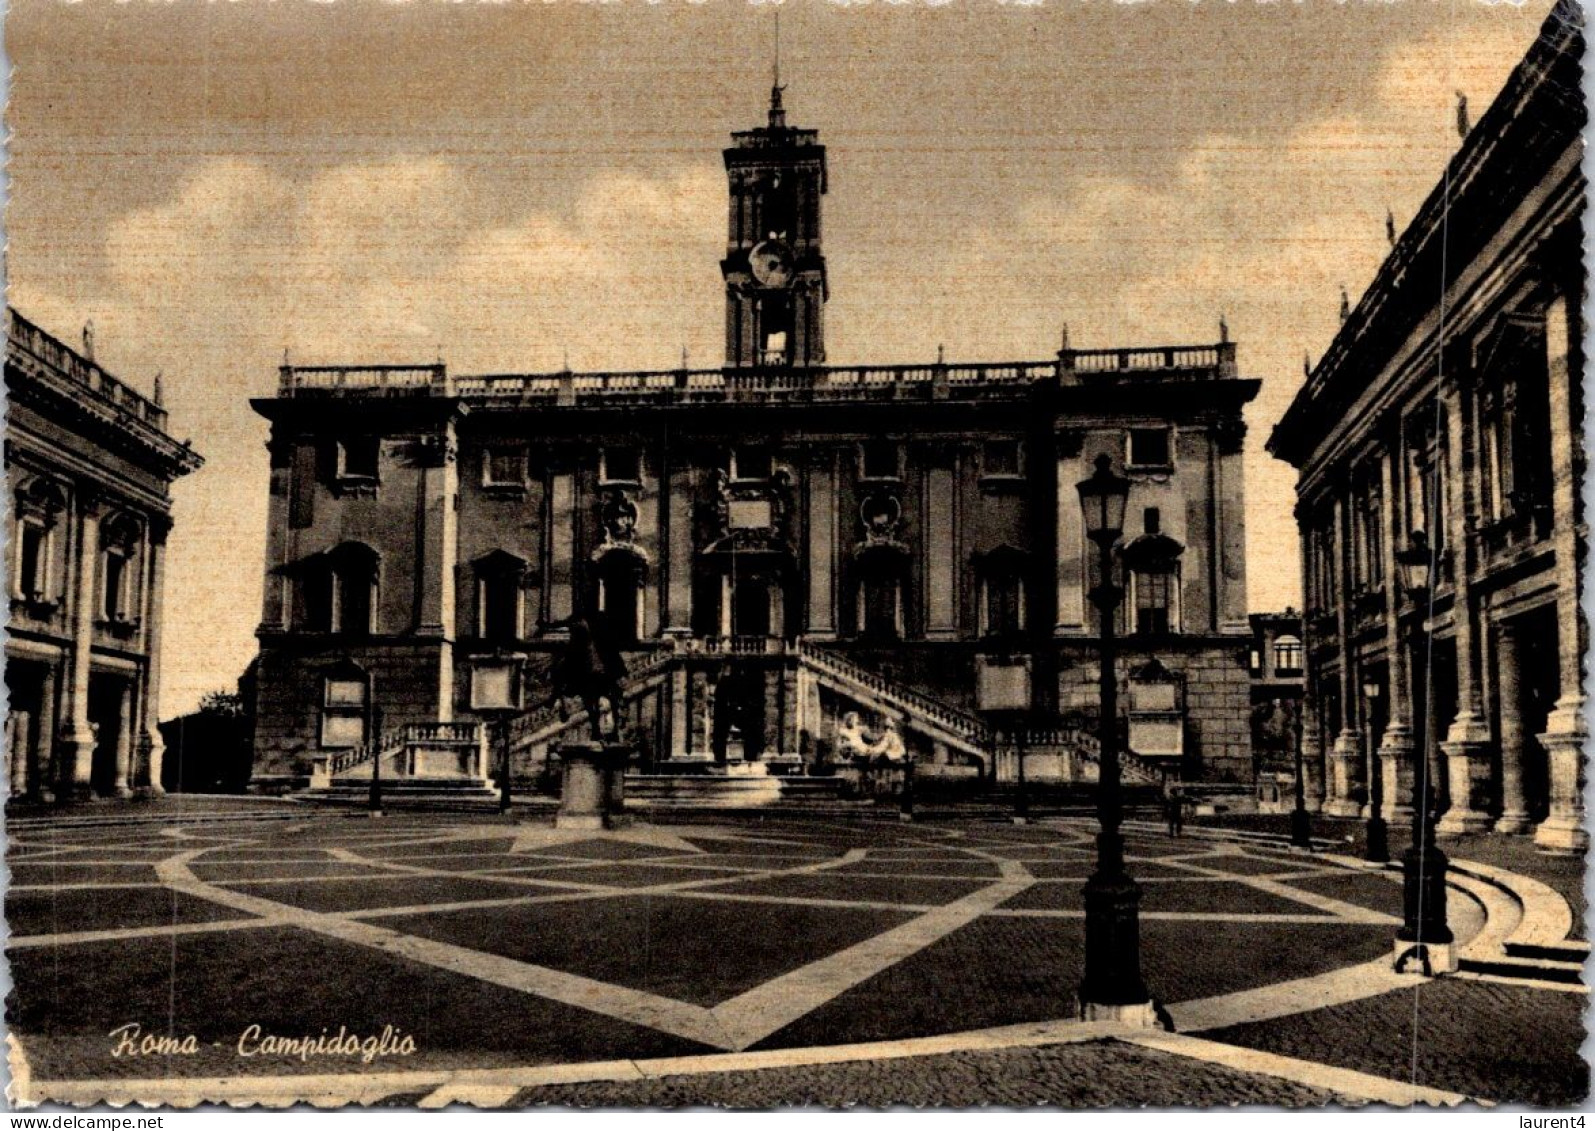 19-4-2024 (2 Z 28) Italy (b/w) Roma (2 Postcards With Monuments) - Andere Monumente & Gebäude